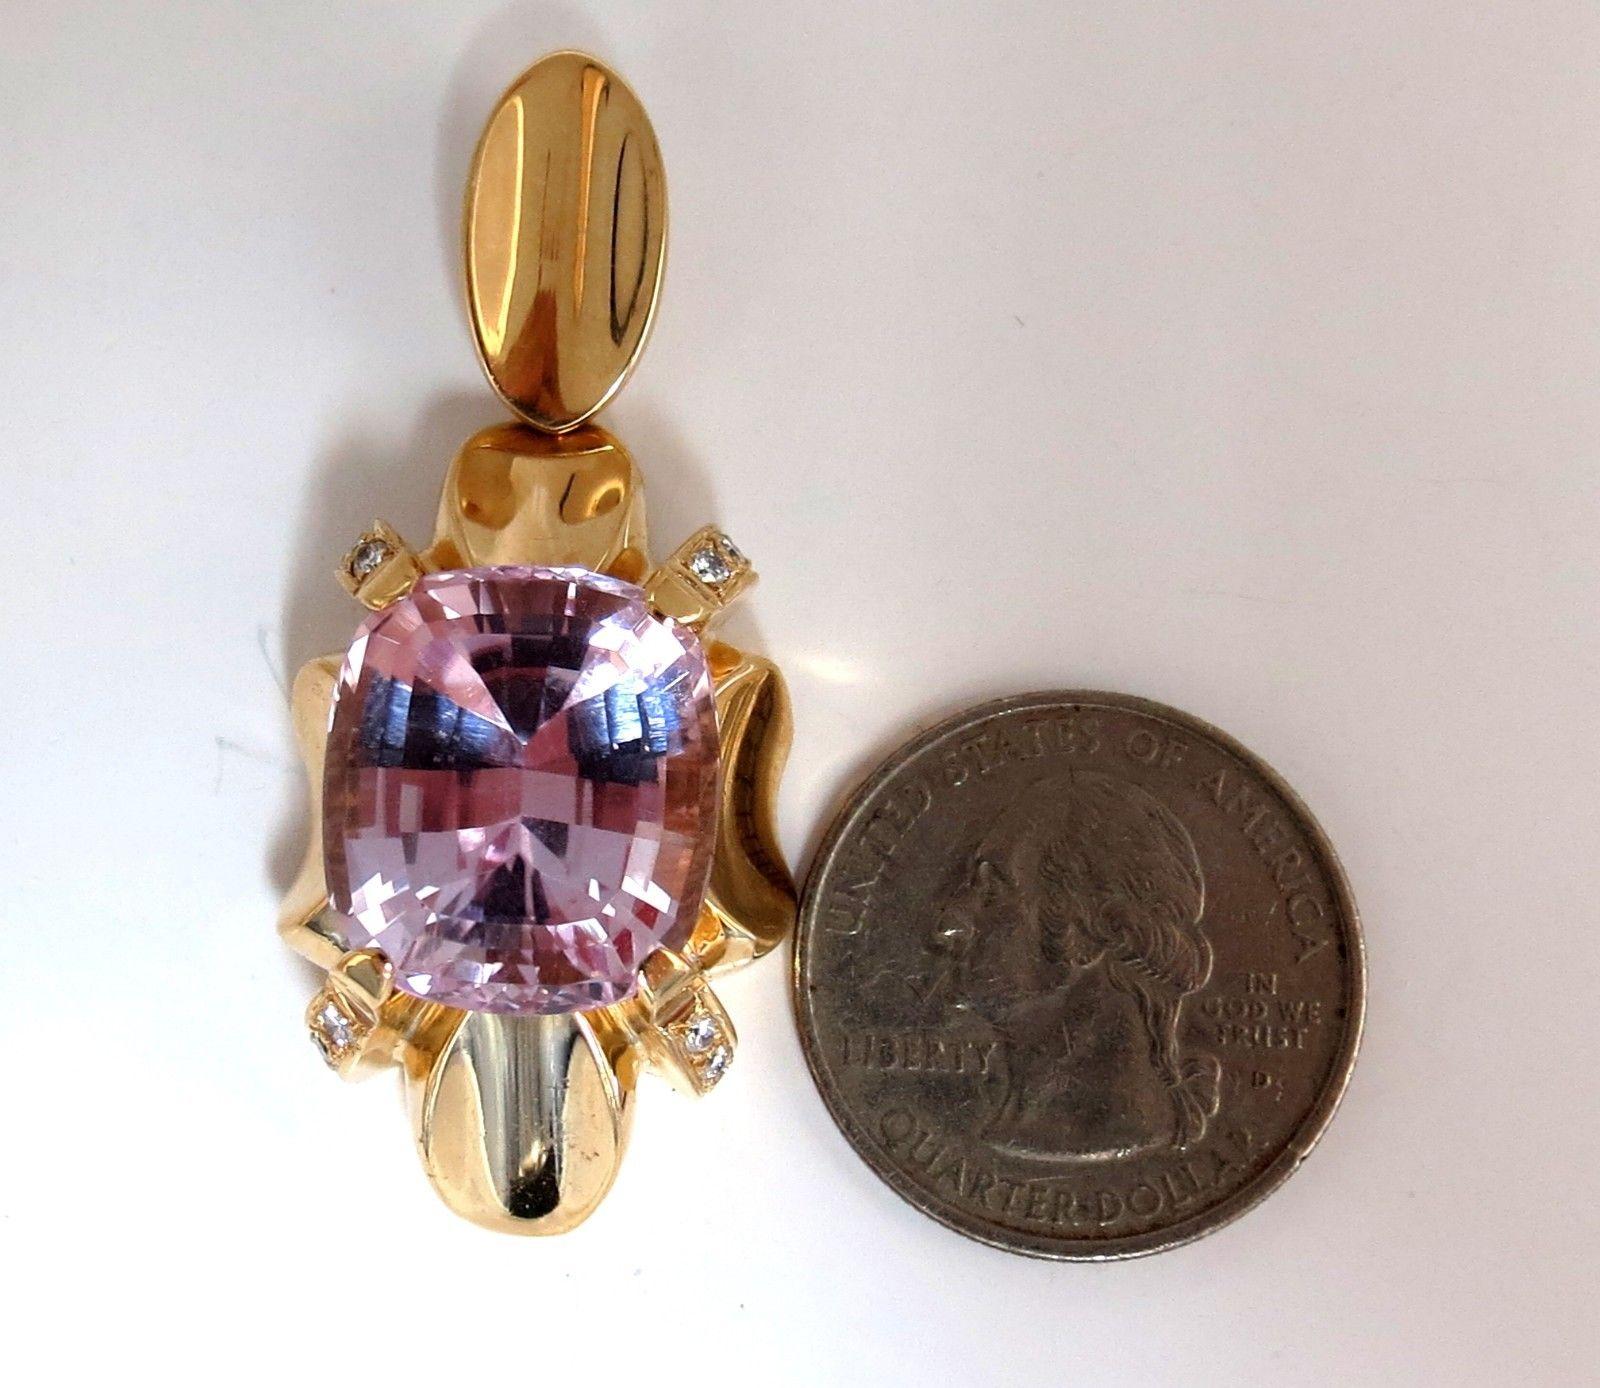 Kunzite,  drop Pendant.

Vintage Prime

18.00ct. natural cushion cut kunzite

mm / rose pink

clean clarity and transparent. 

.50ct. Natural diamonds.

G color Vs-2 clarity

14Kt yellow gold 

24 grams.

pendant height:  2 inch

width: 1